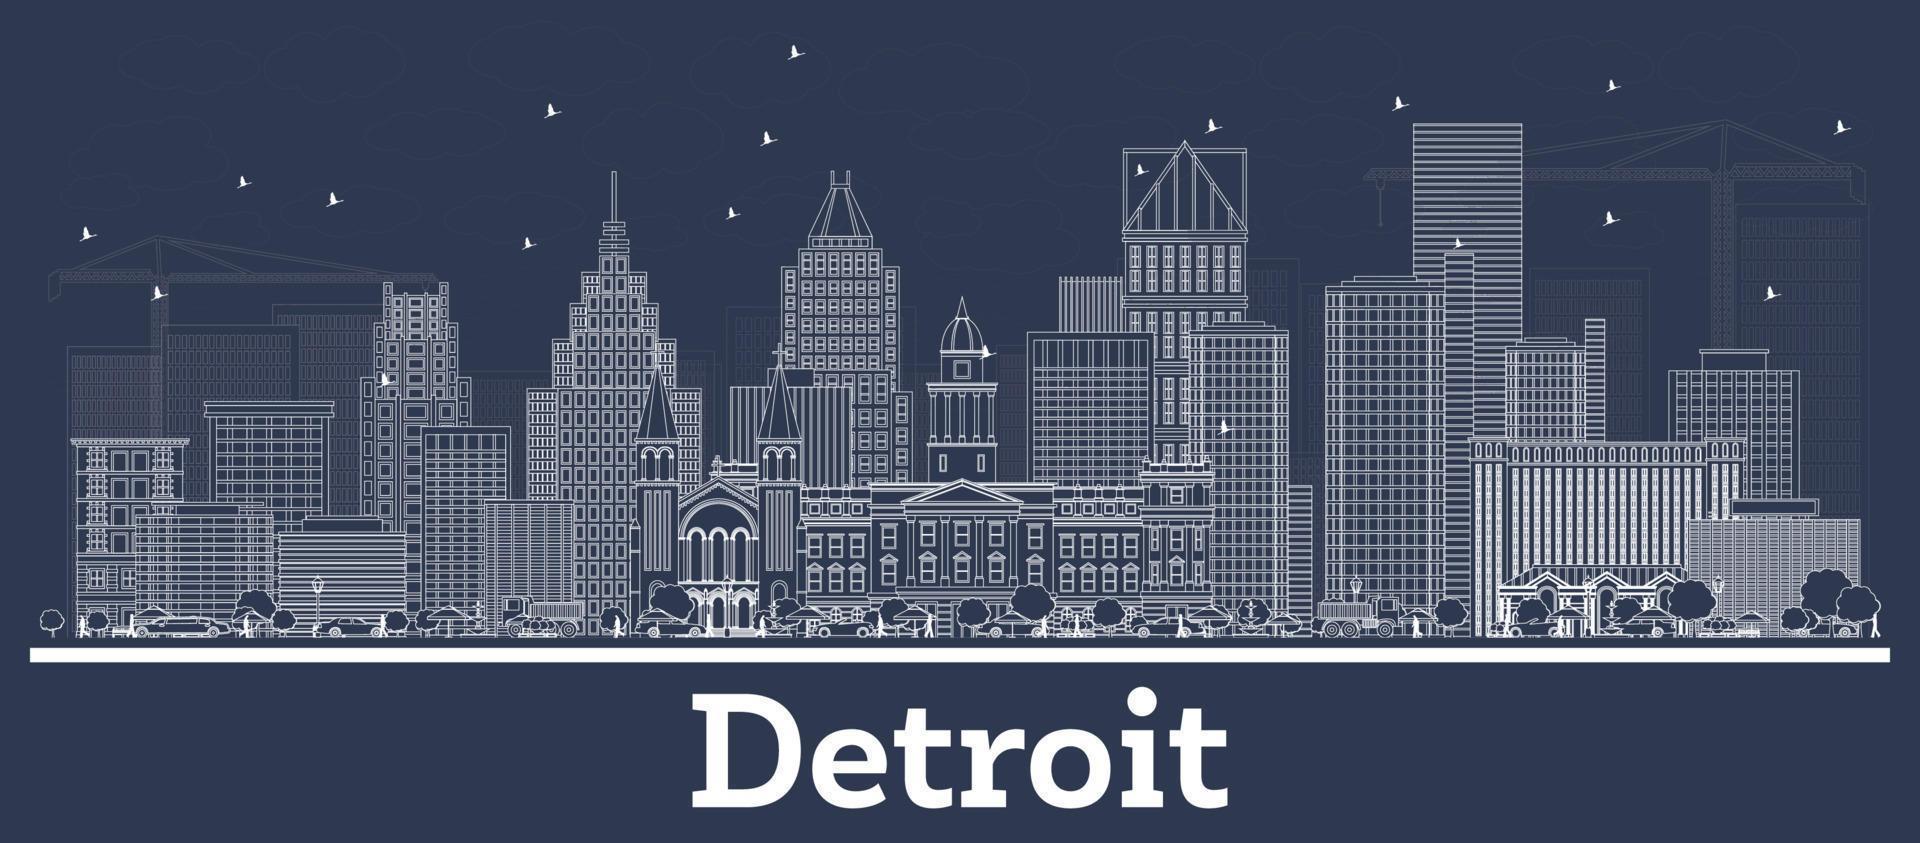 Outline Detroit Michigan City Skyline with White Buildings. vector